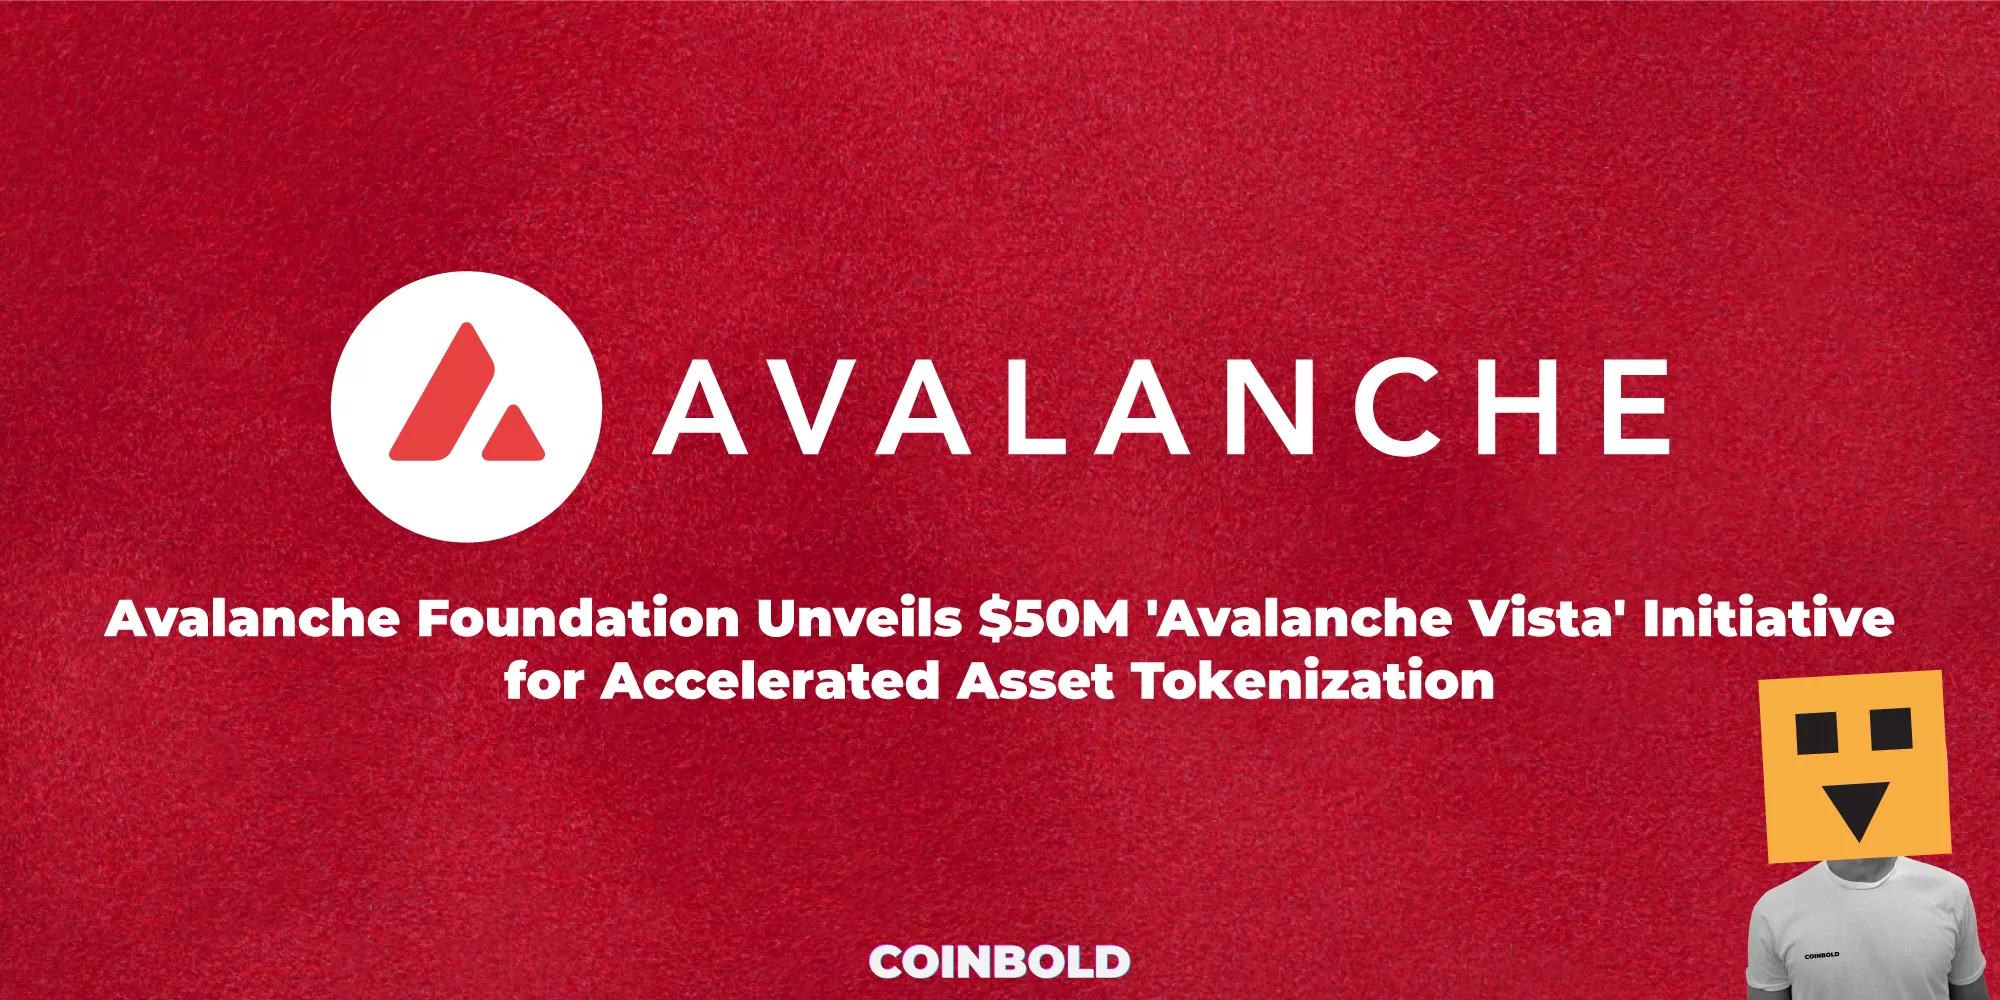 Avalanche Foundation Unveils $50M 'Avalanche Vista' Initiative for Accelerated Asset Tokenization